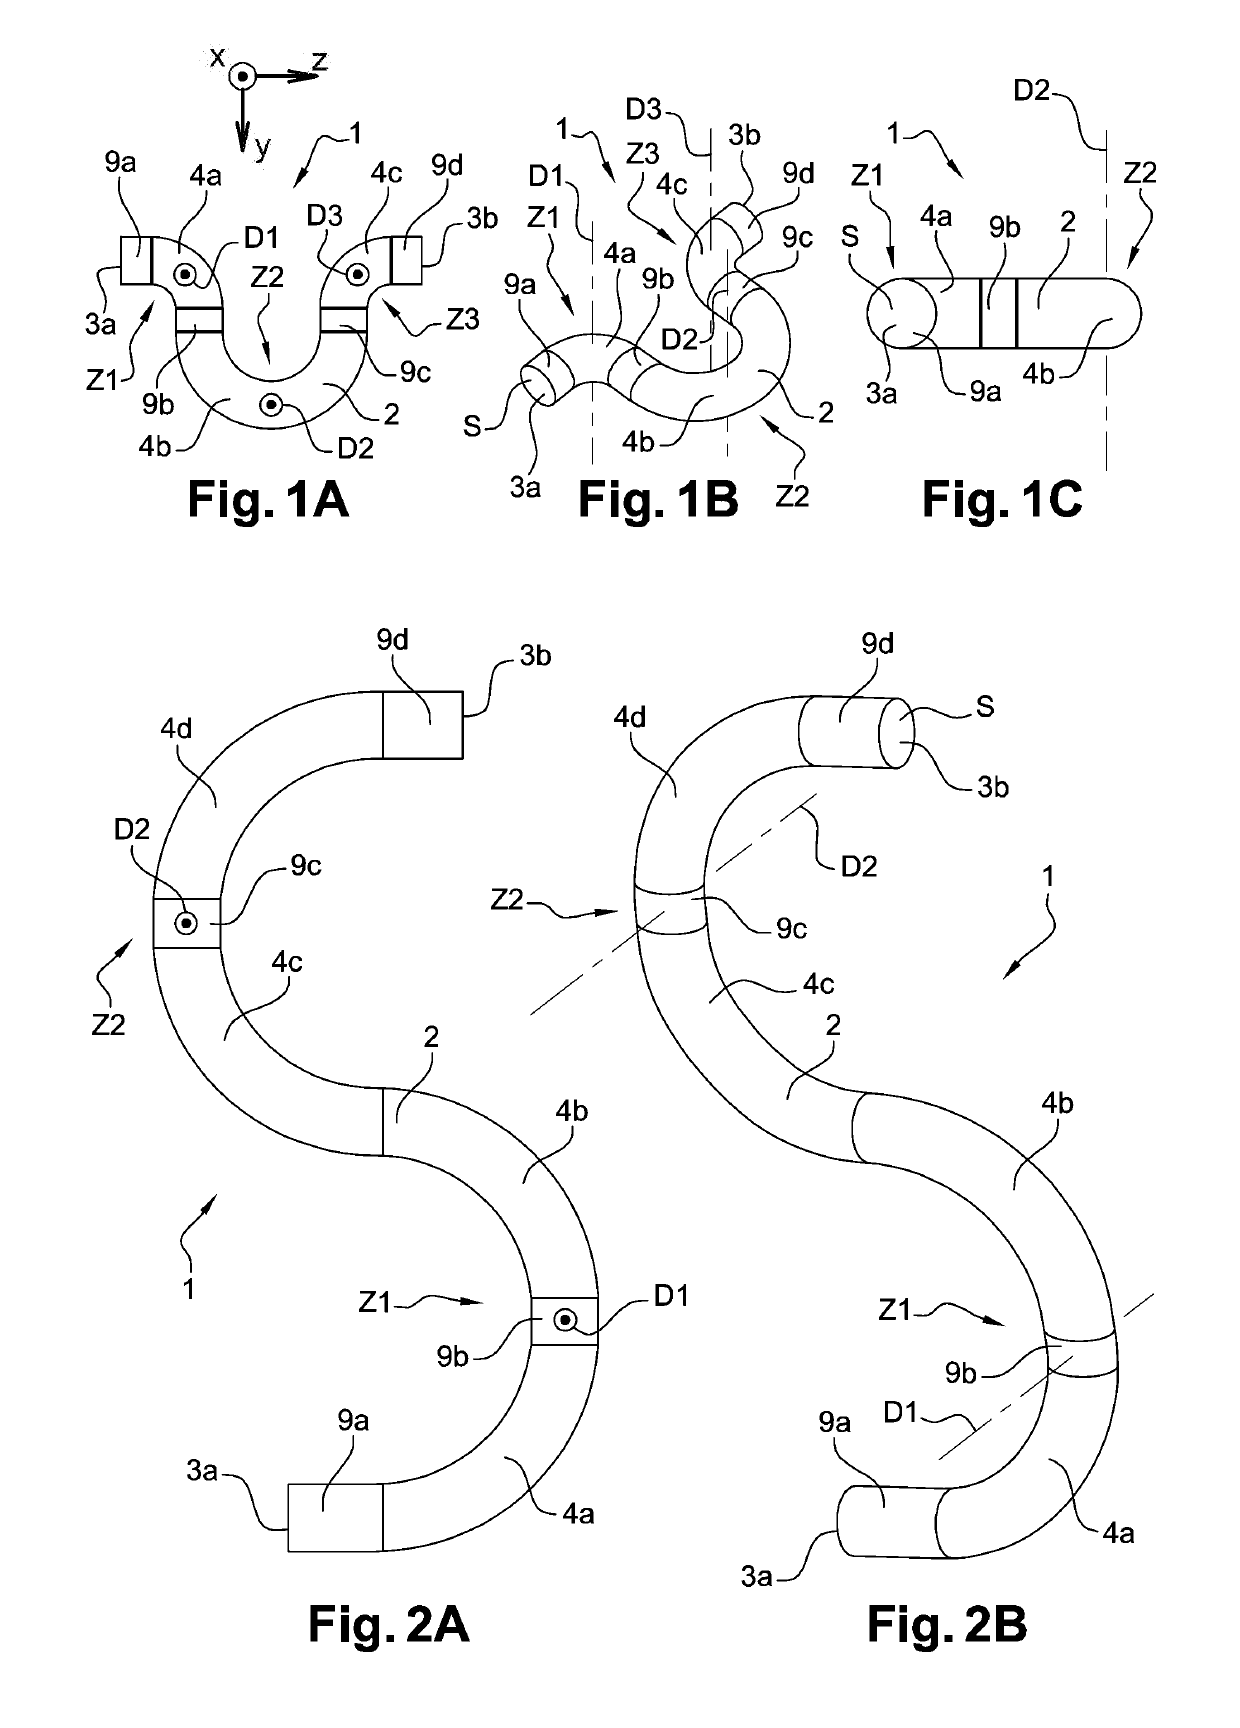 Electrical connectors having a bent main body for electrical connection between a housing and a support, and being disposed as a grid array or network